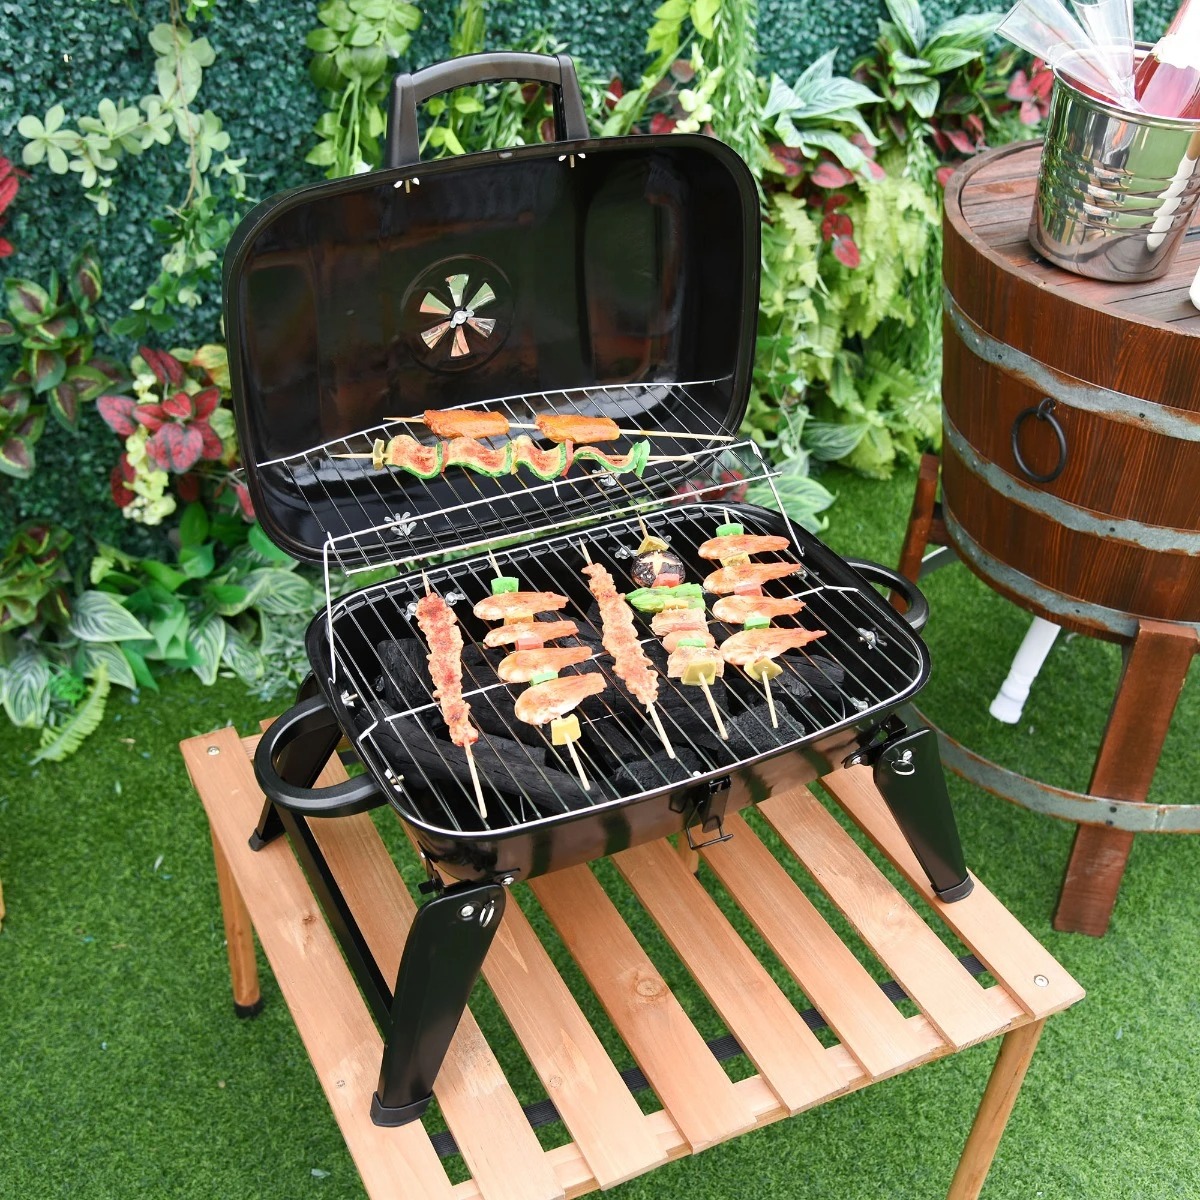  Portable Tabletop Charcoal Grill BBQ Camping Picnic Cooker - Black